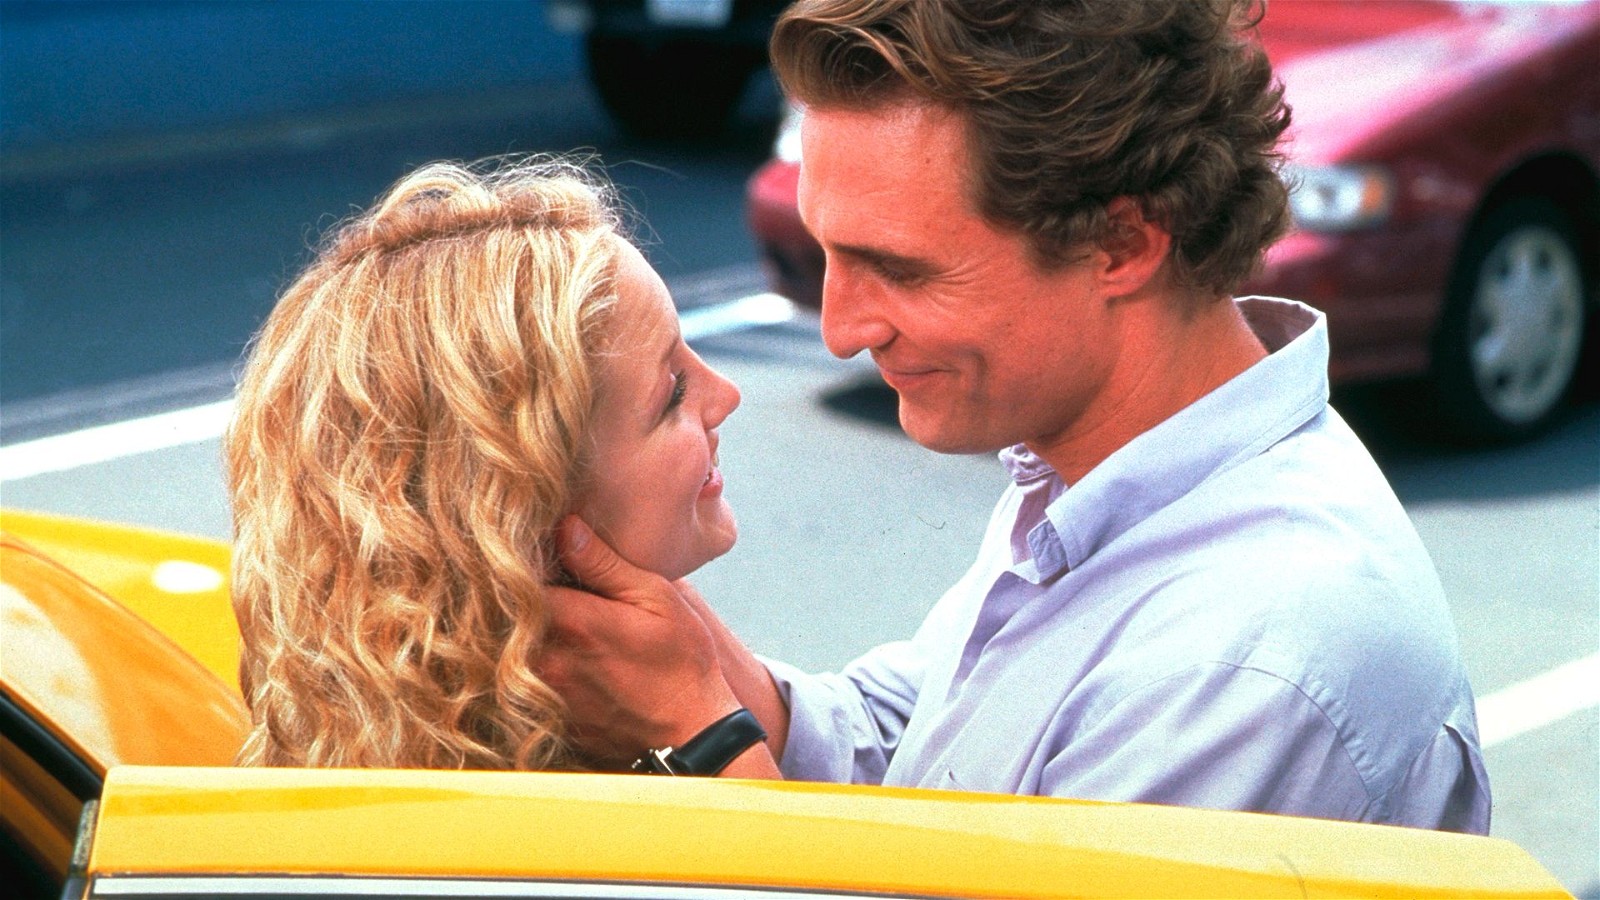 Kate Hudson and Matthew McConaughey had impeccable chemistry in How to Lose a Guy in 10 Days